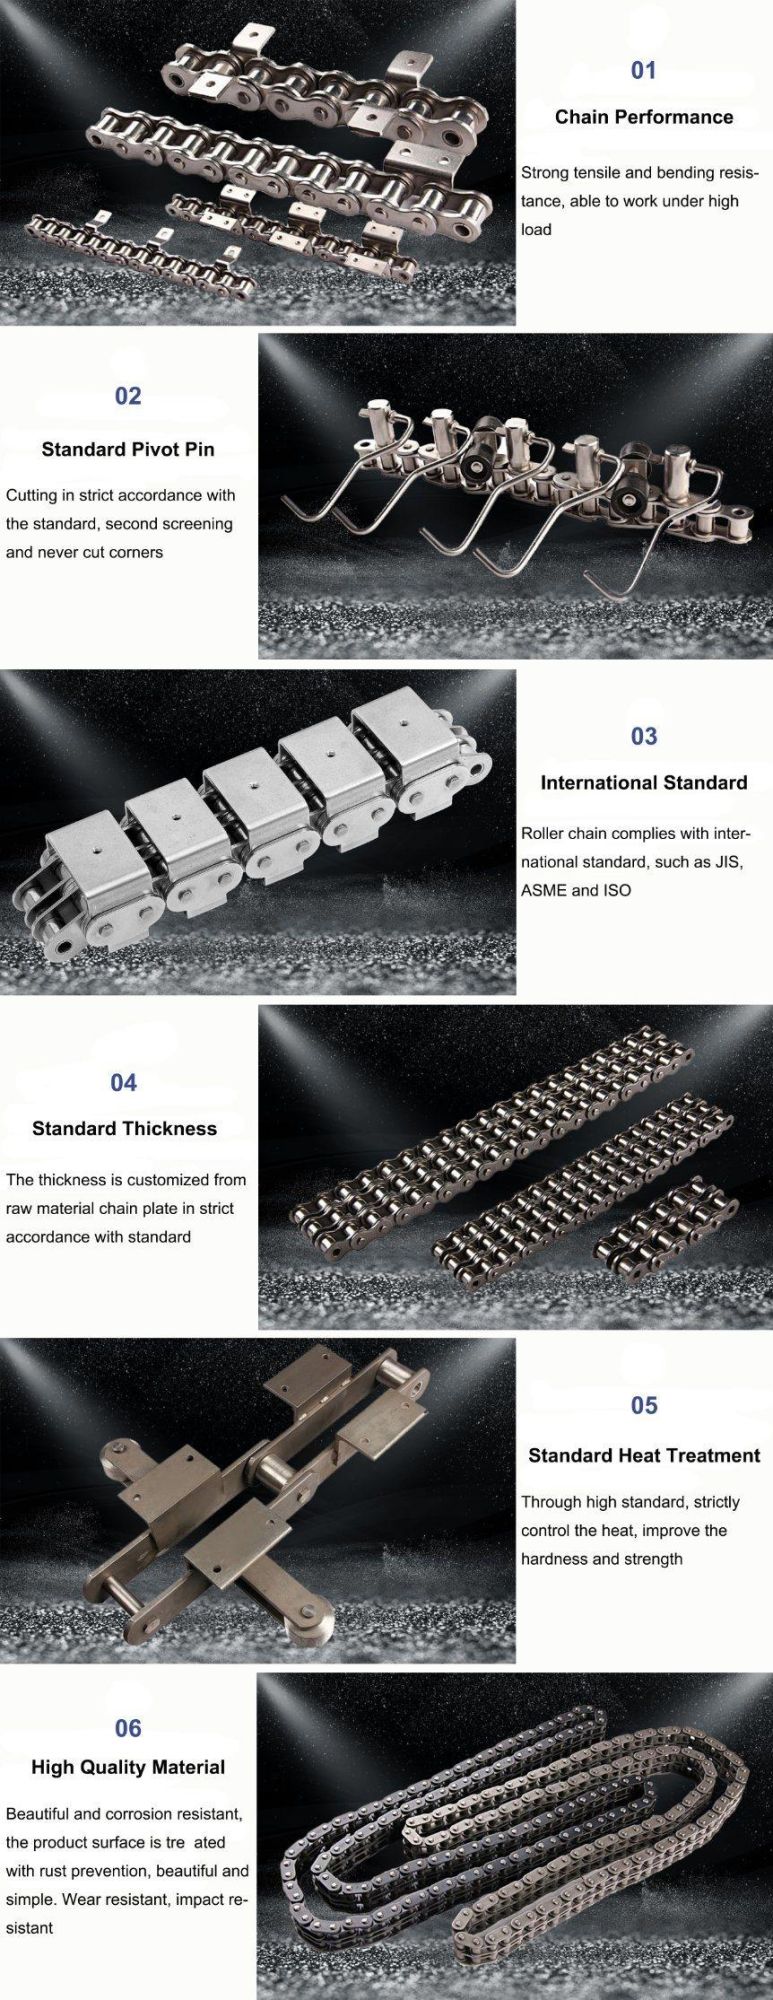 Stainless Steel Straight Plate Welded Flat Top Hinge Transmission Table Top Conveyor Roller Chain